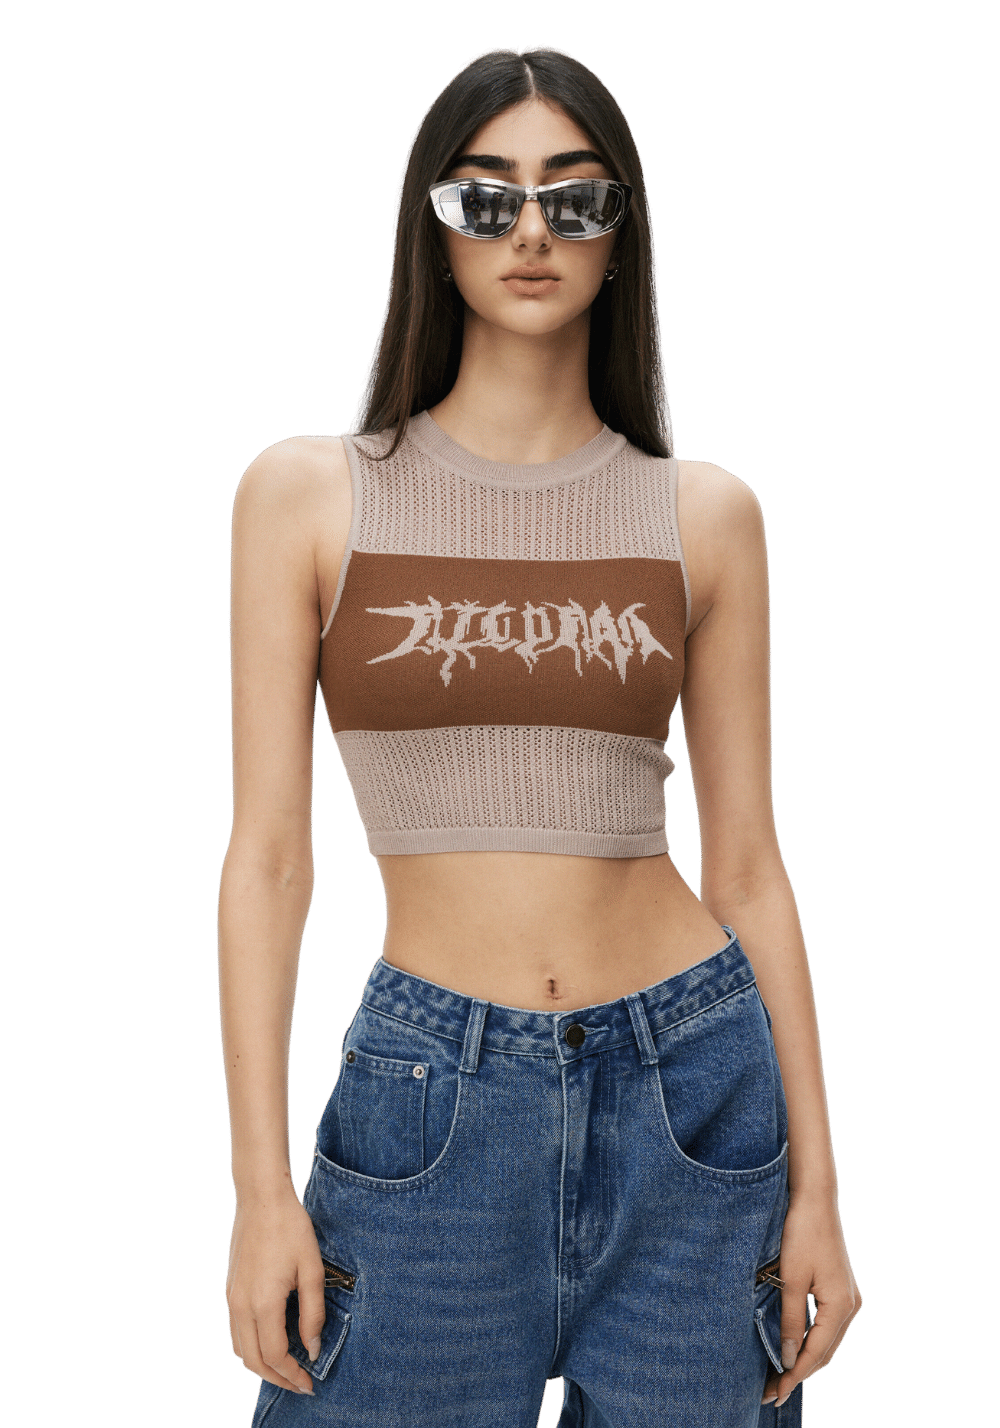 Hollow Knit Camisole - PSYLOS 1, Hollow Knit Camisole, T-Shirt, Azepam, PSYLOS 1